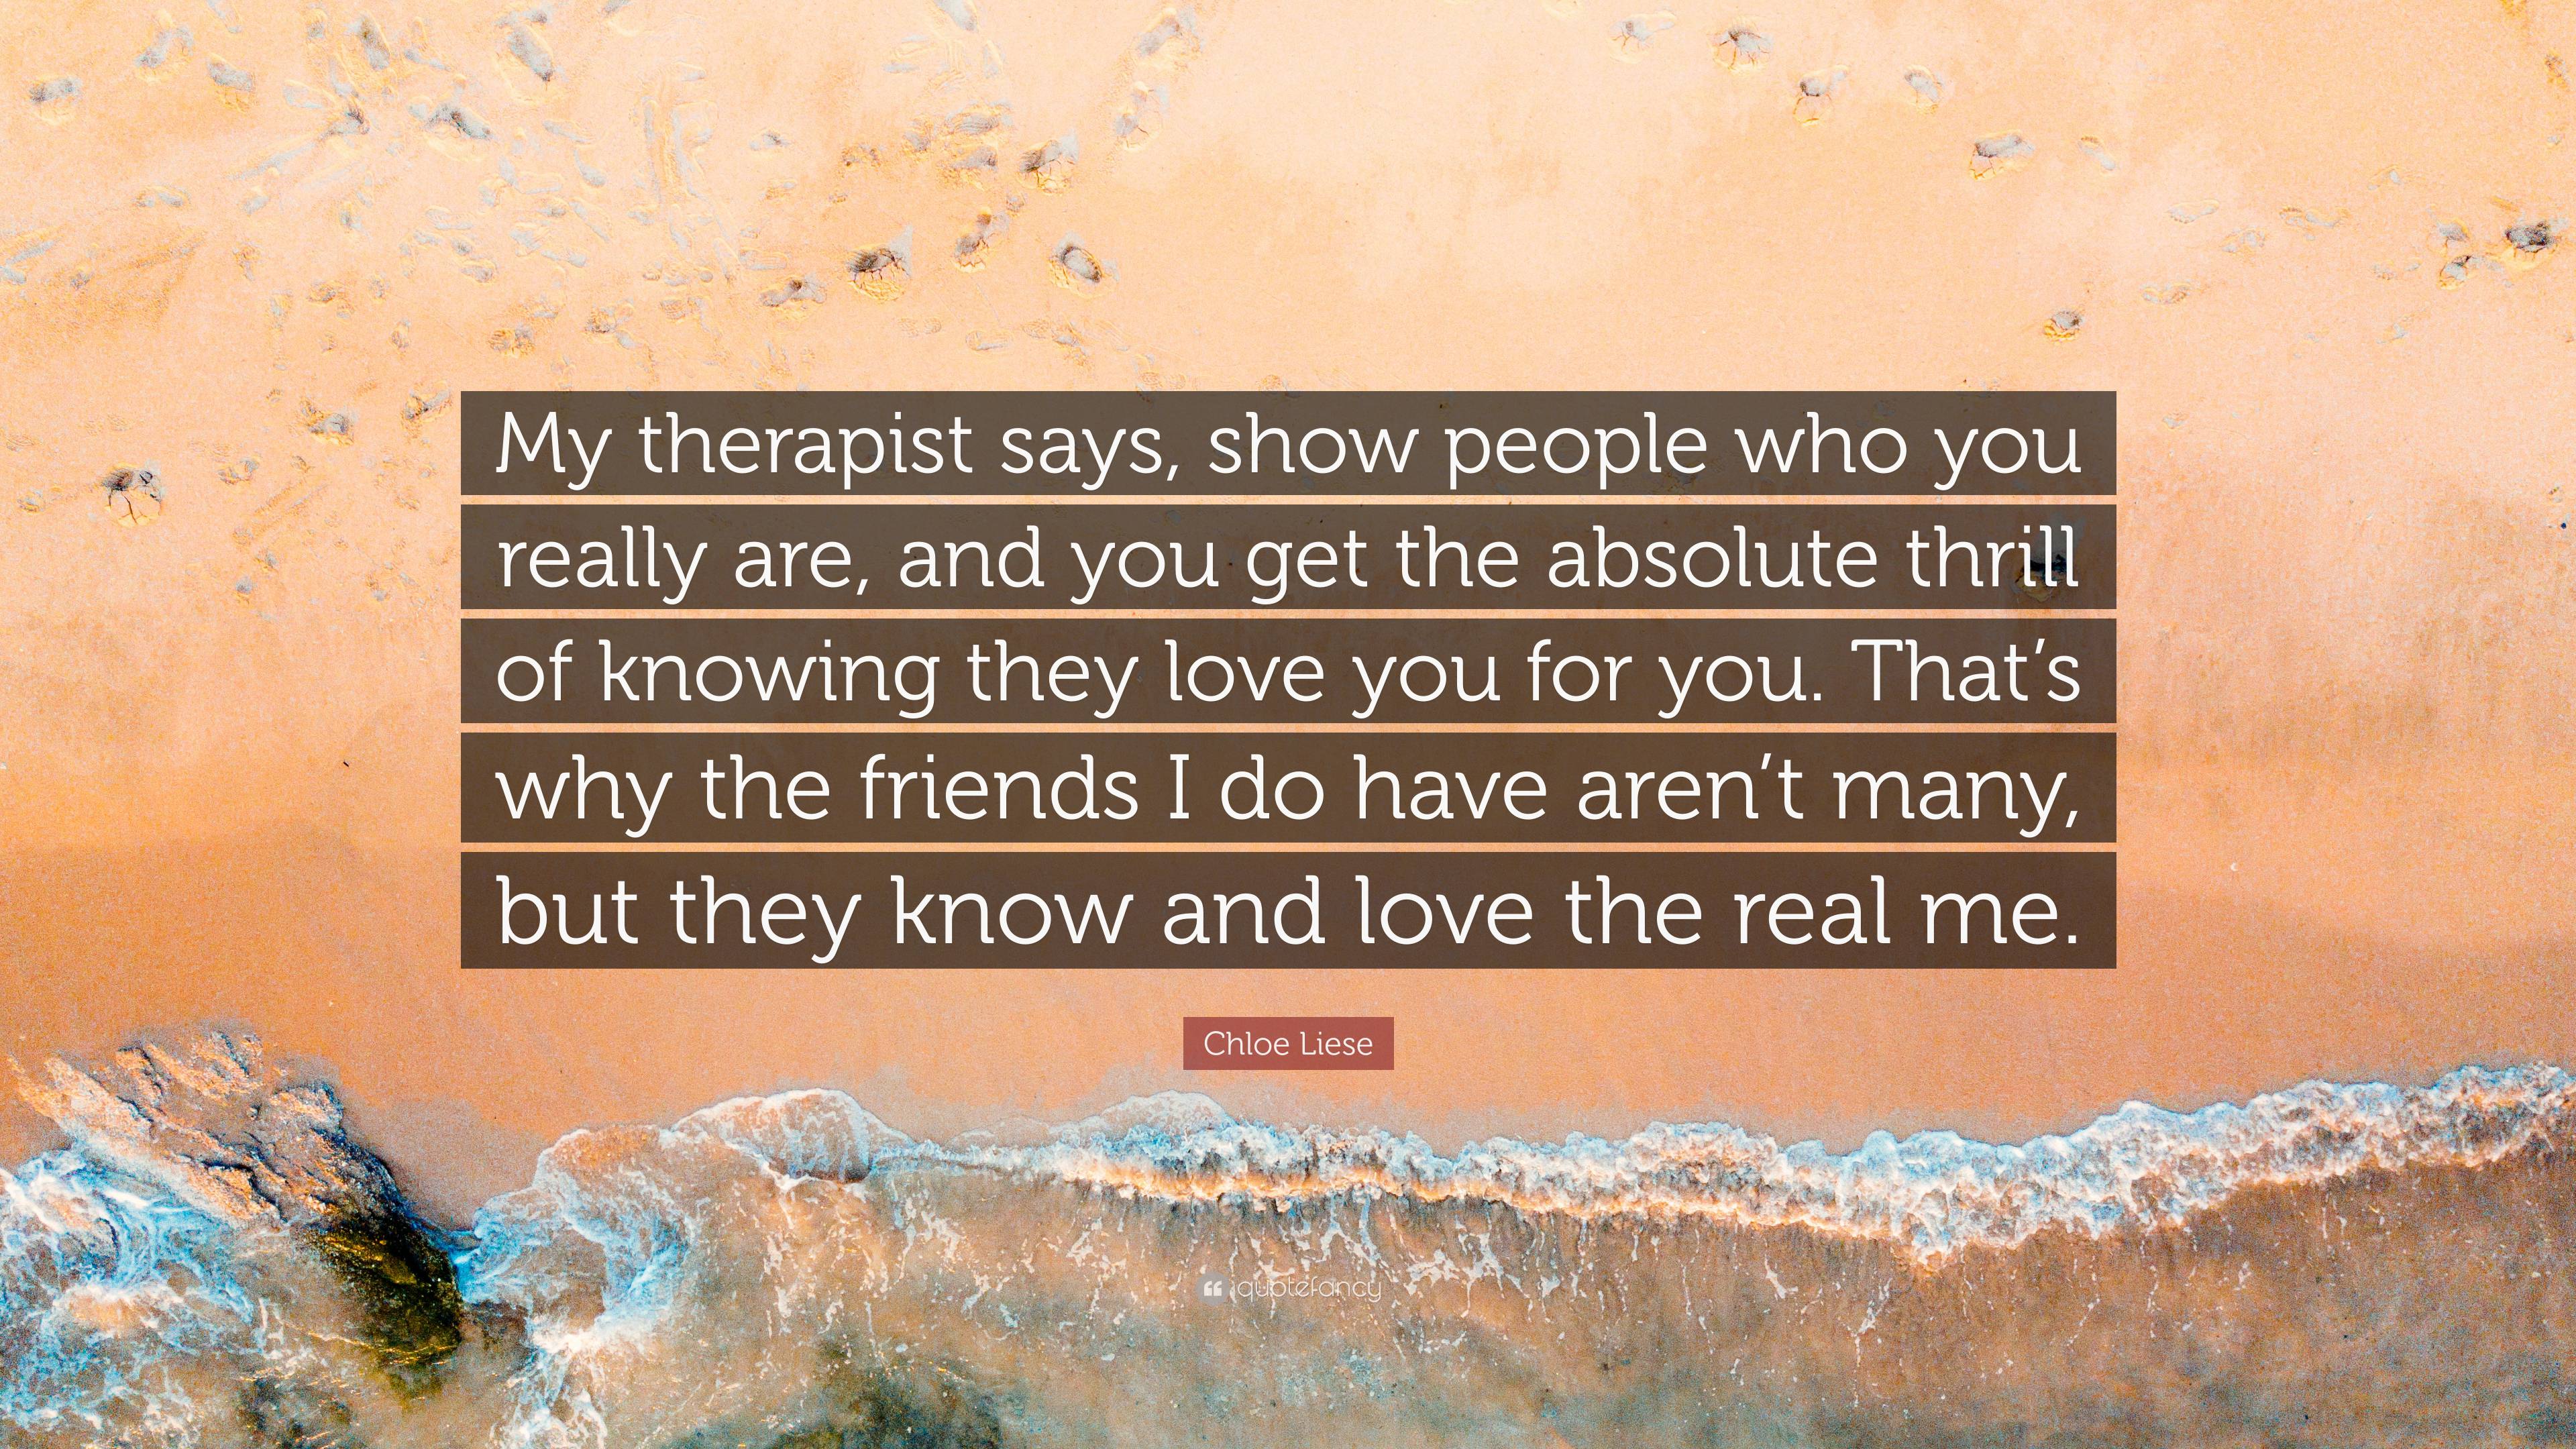 What Is True Love? A Therapist Explains